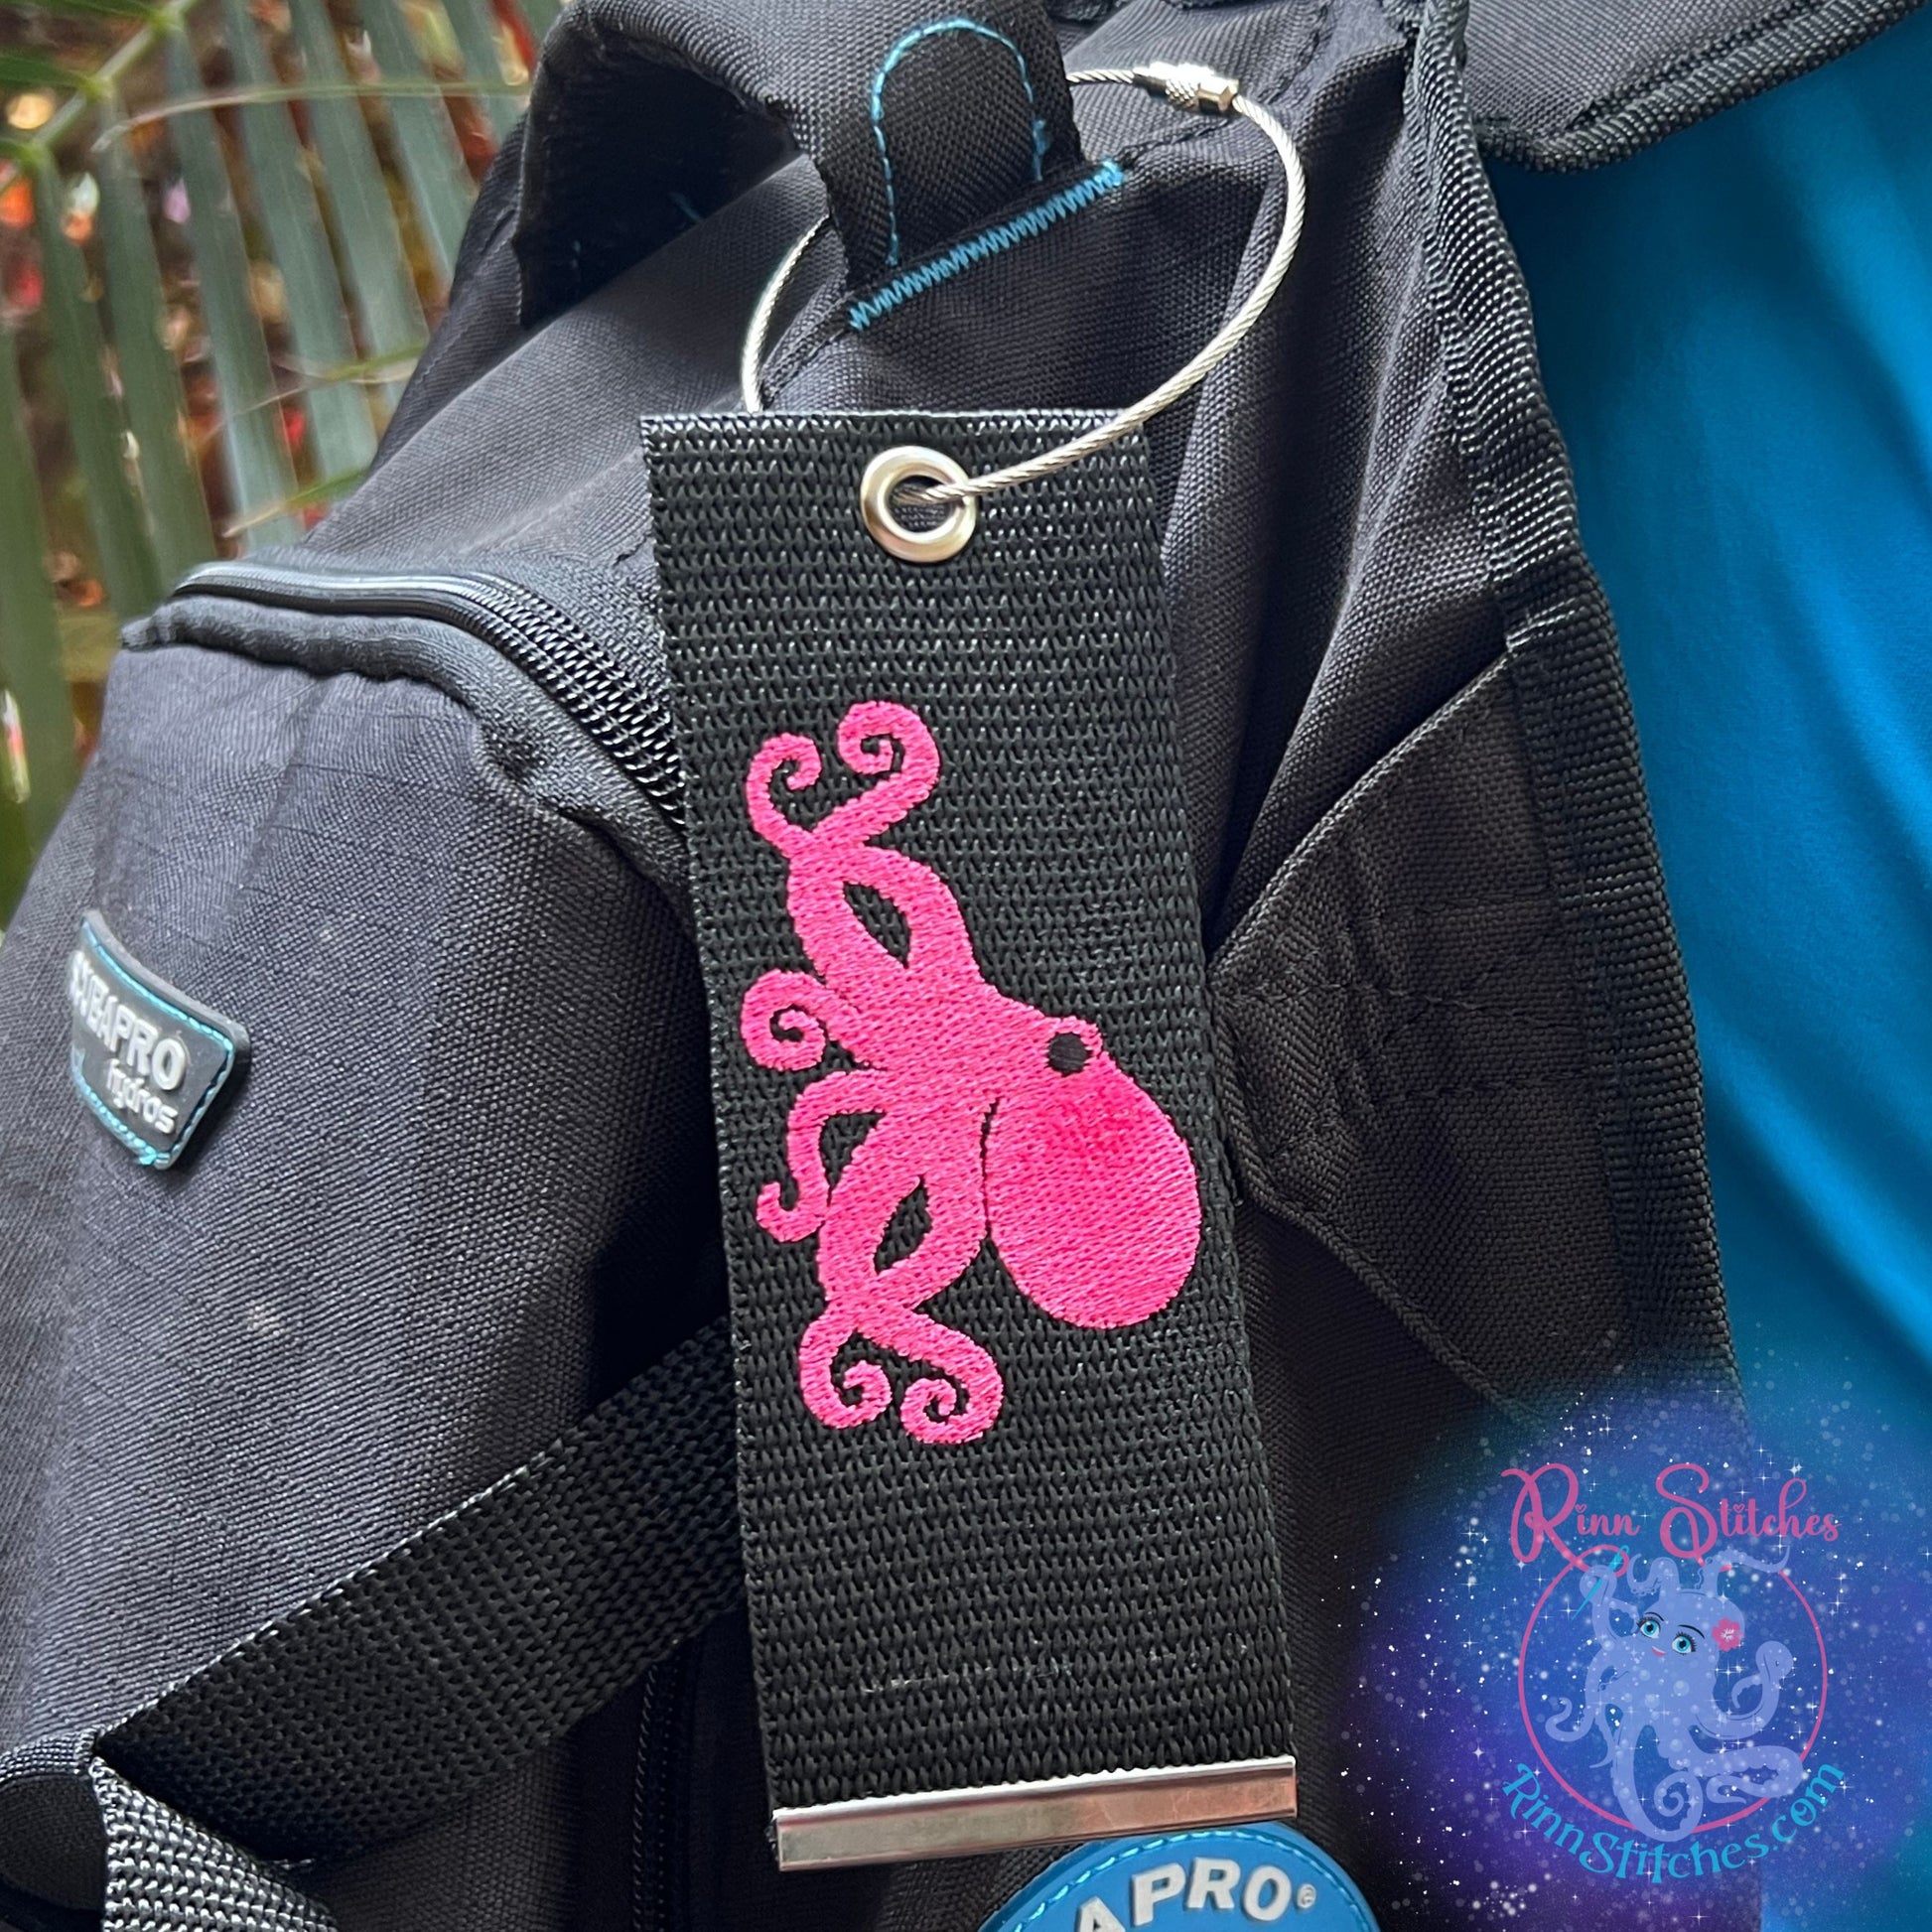 Tako (Octopus)🐙Luggage Tag, Personalized Embroidered Bag Tag for all your Travel needs